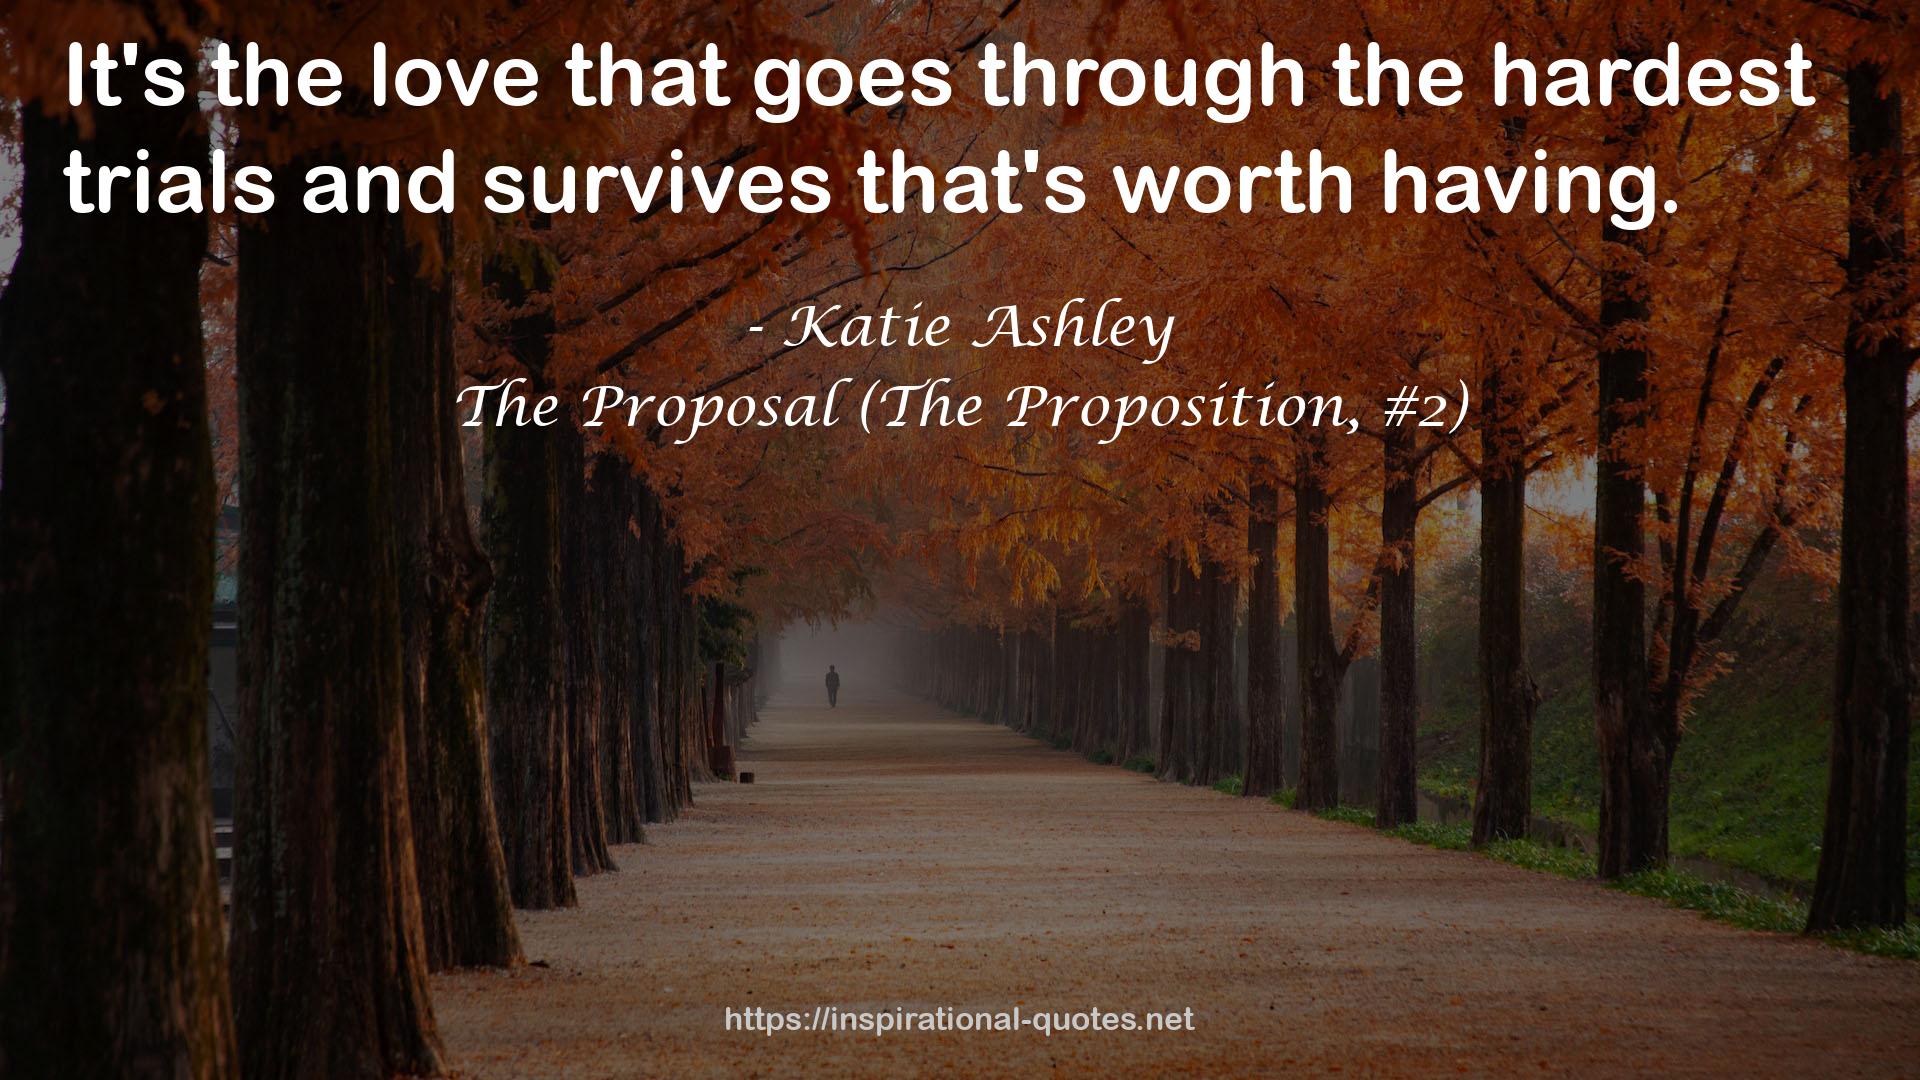 The Proposal (The Proposition, #2) QUOTES